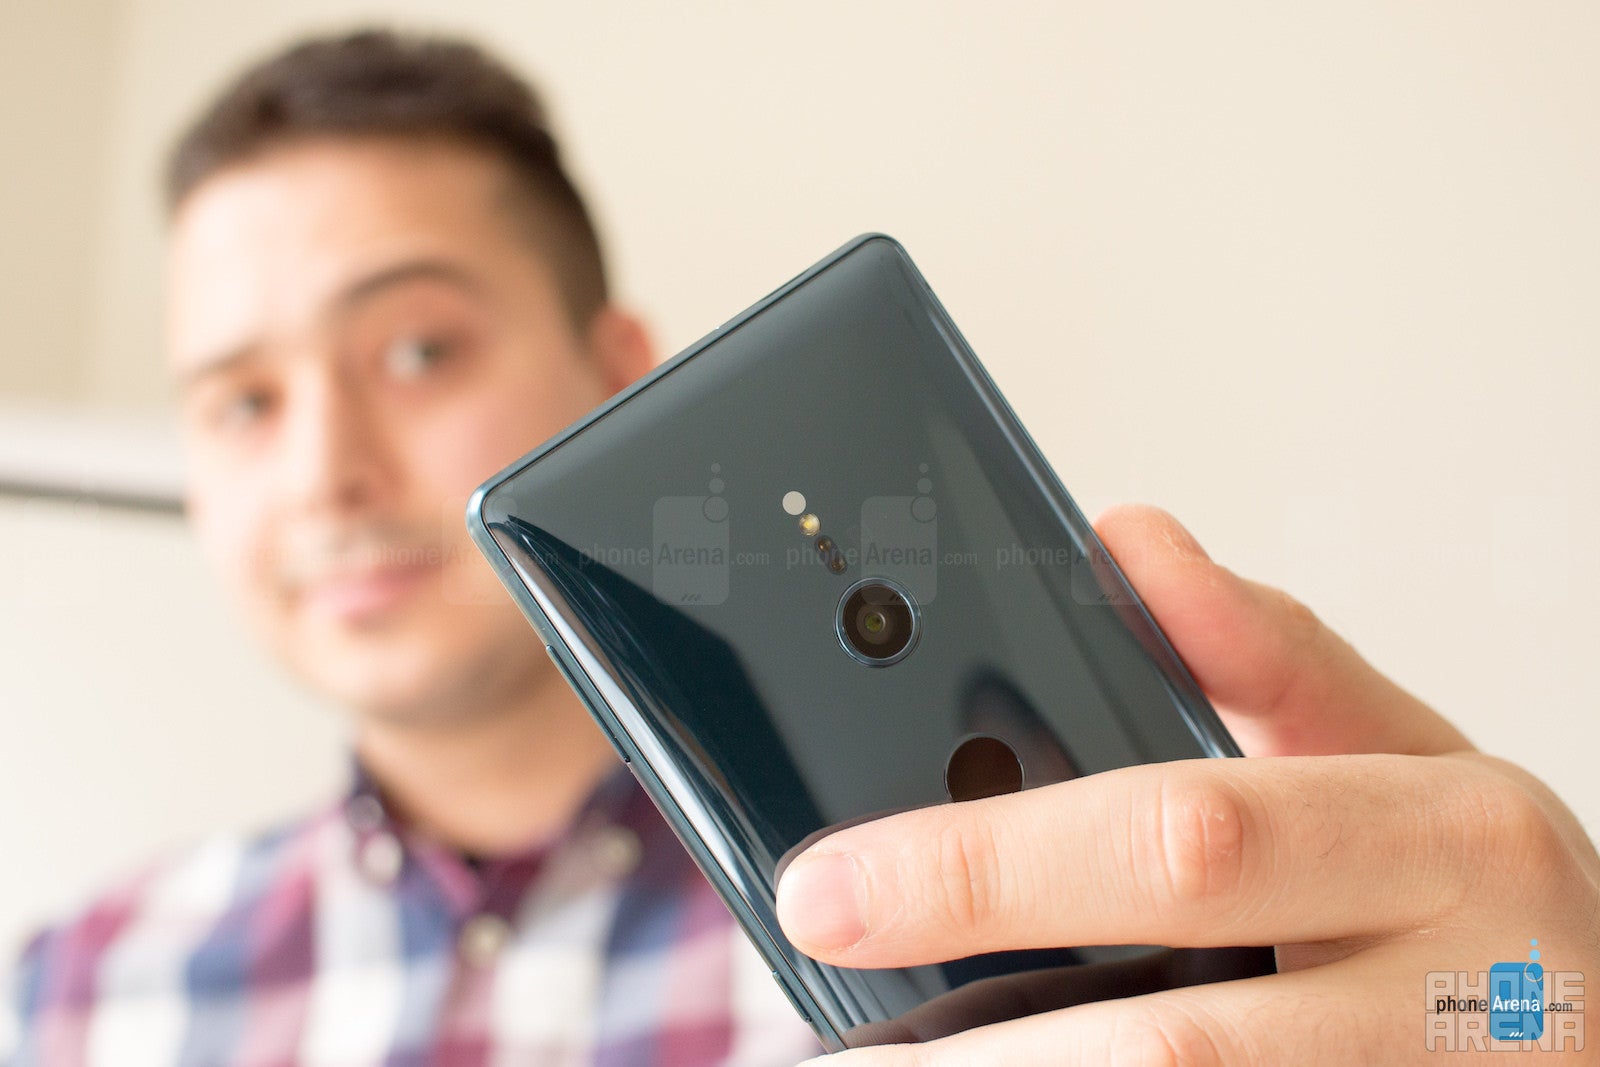 Sony Xperia XZ2 hands-on: up close with Sony's fresh, new design philosophy